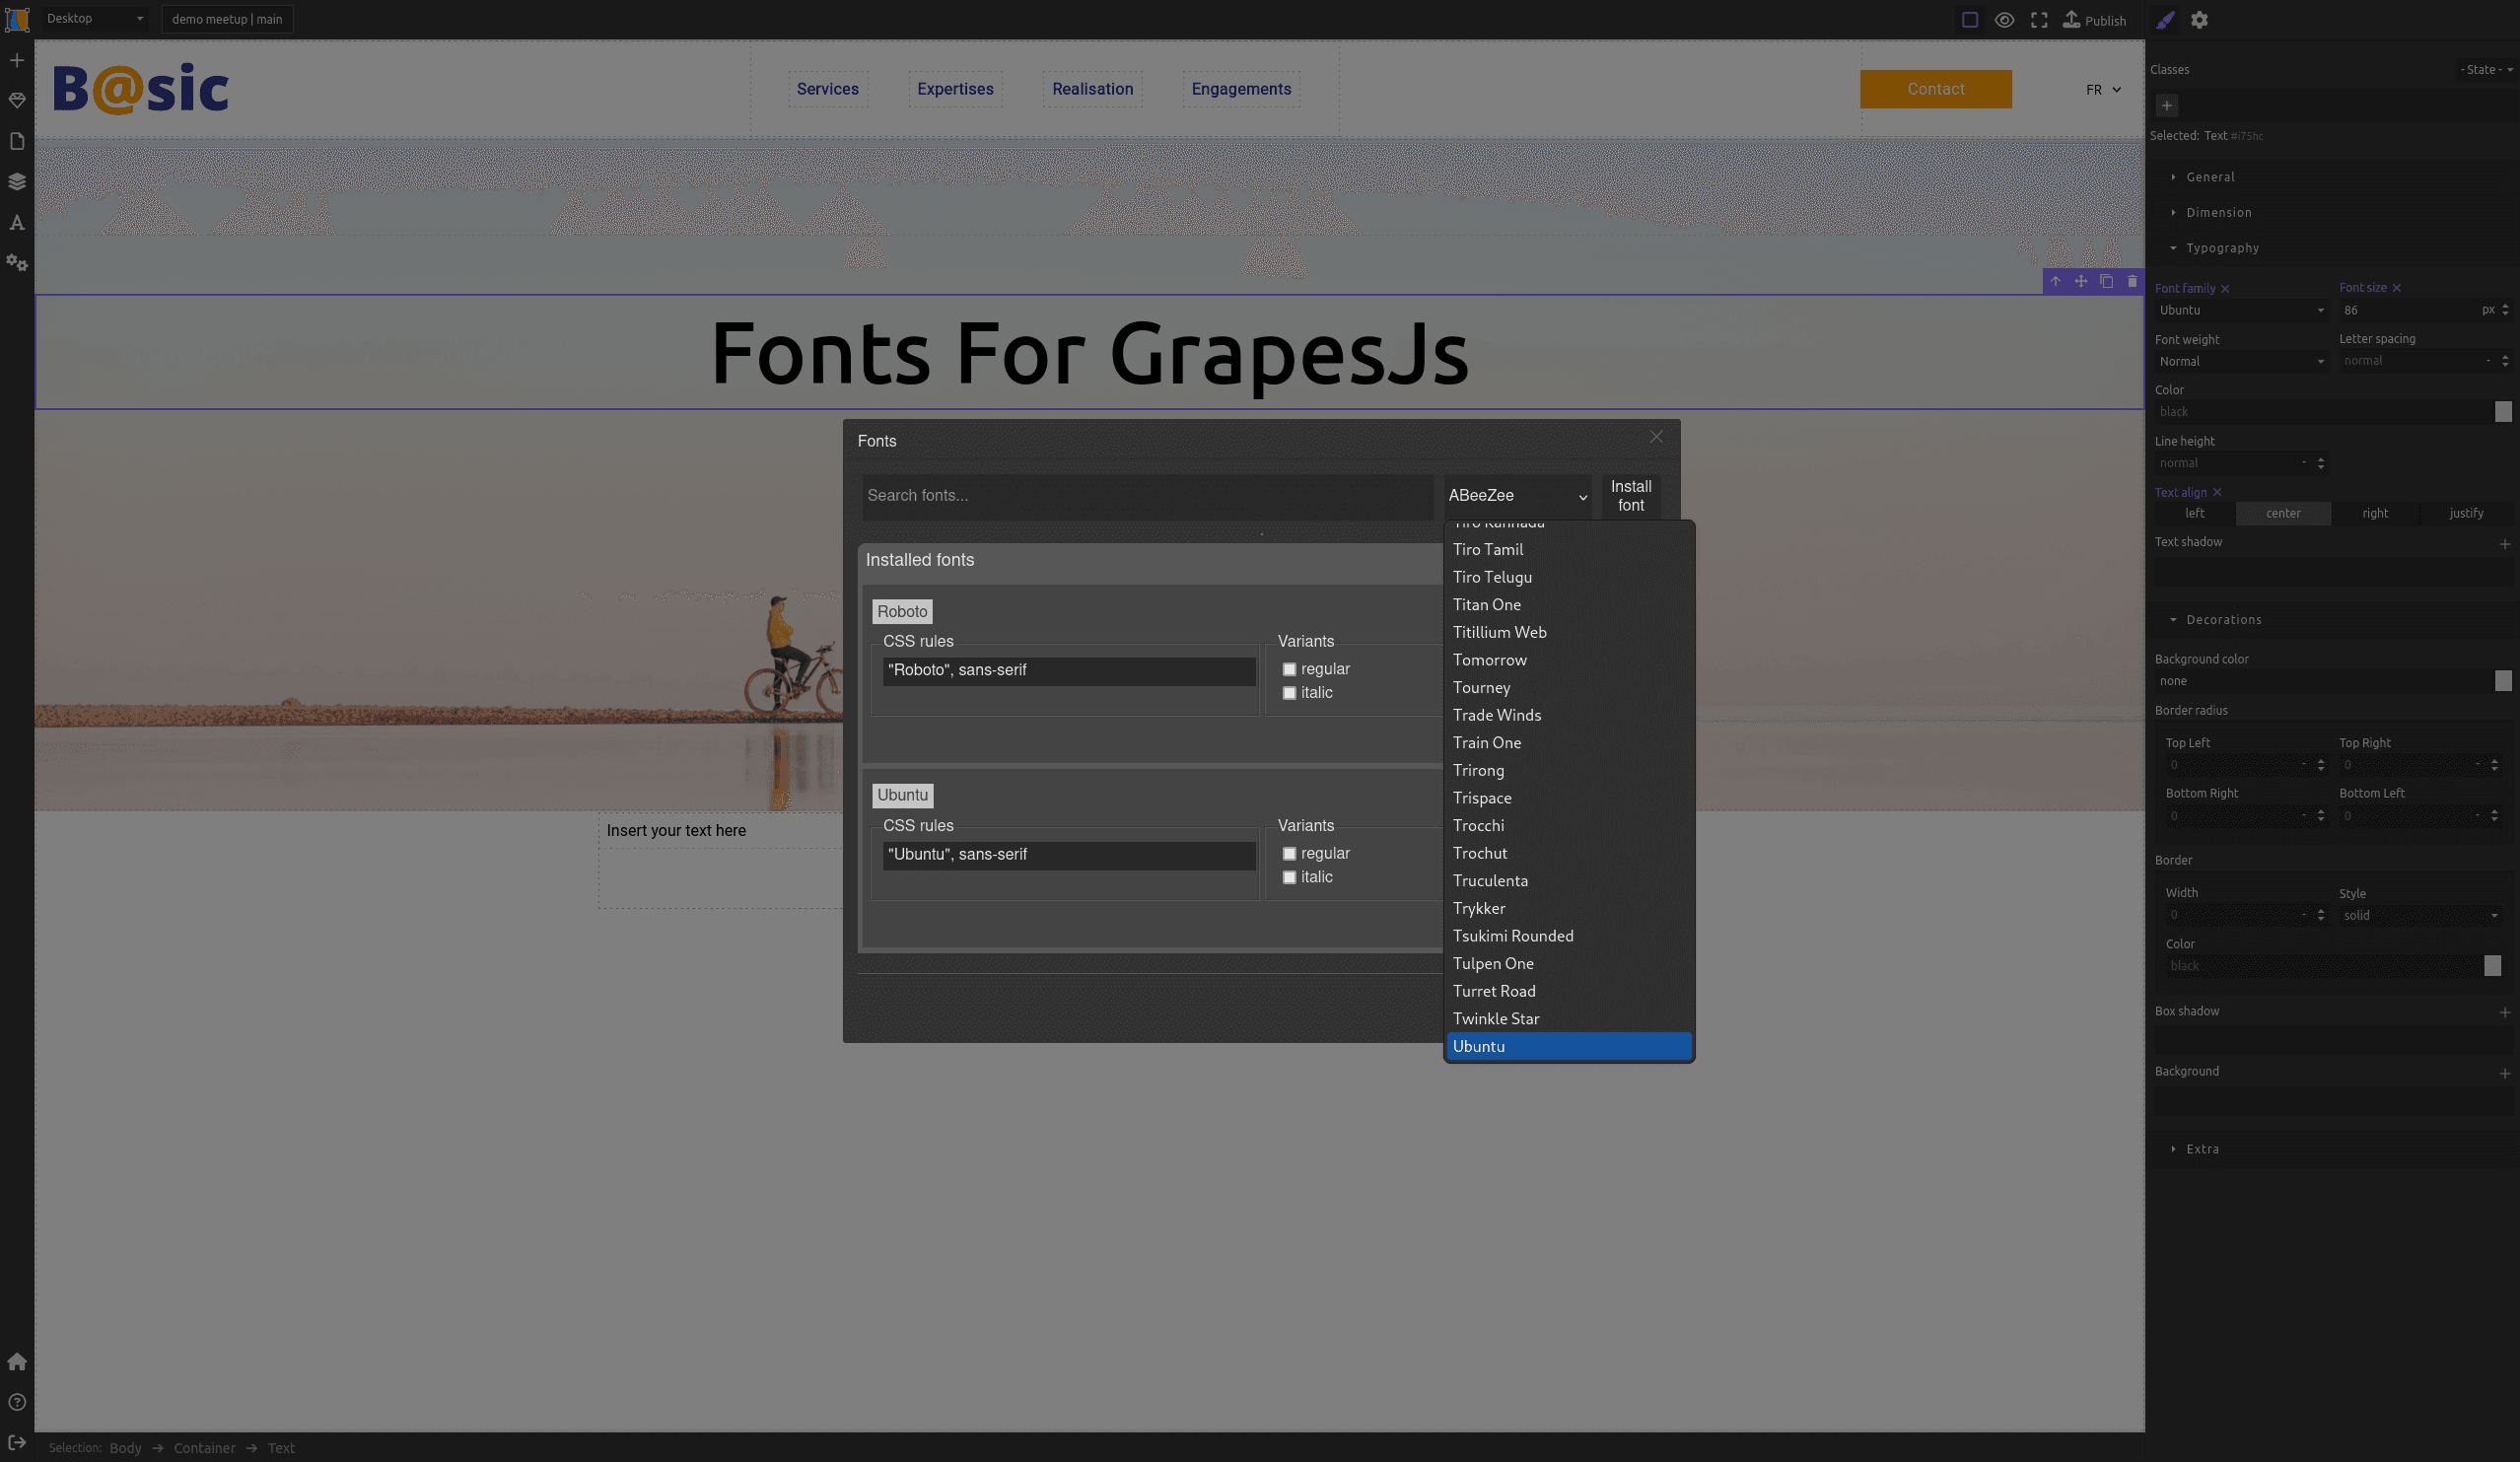 Custom Fonts - choose the best sets of plugins and presets for GrapesJS